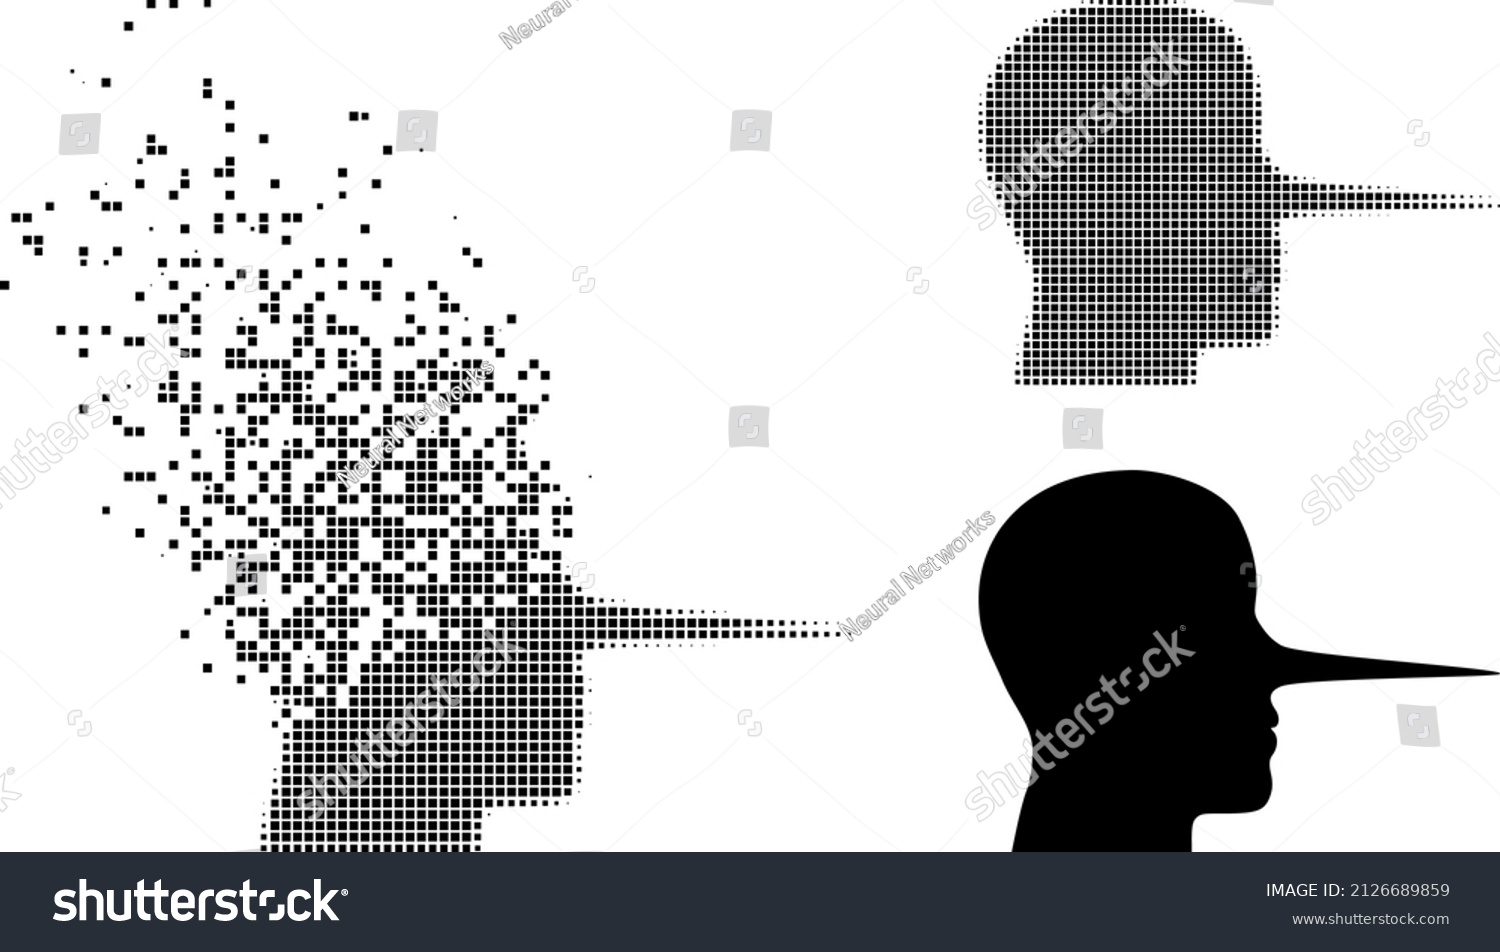 SVG of Fractured pixelated liar person vector icon with destruction effect, and original vector image. Pixel destruction effect for liar person shows speed and movement of cyberspace things. svg